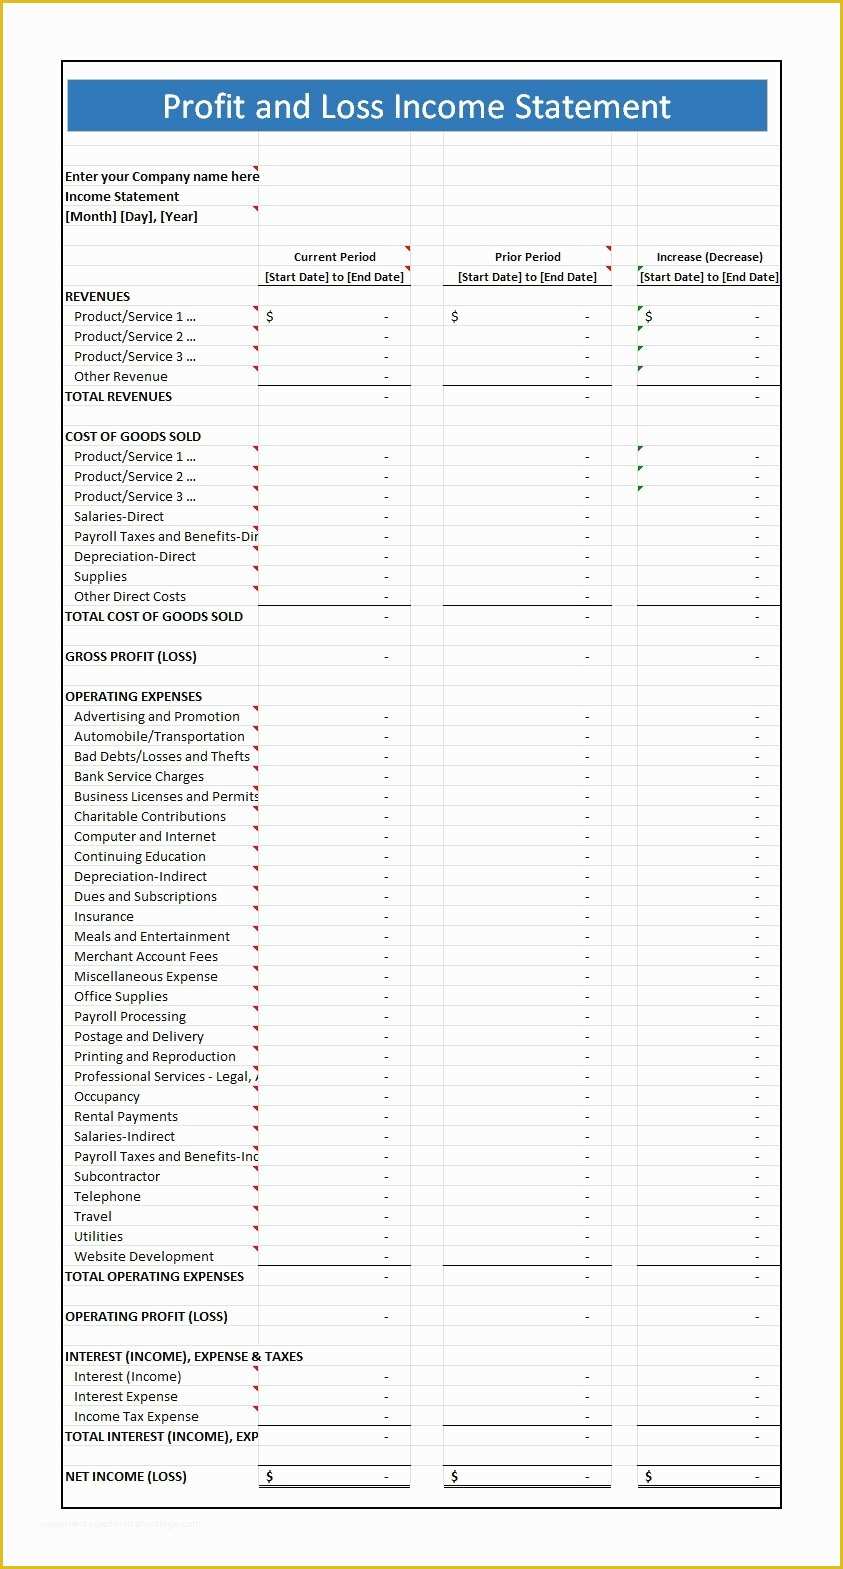 Profit and Loss Statement Template Free Of 35 Profit and Loss Statement Templates & forms